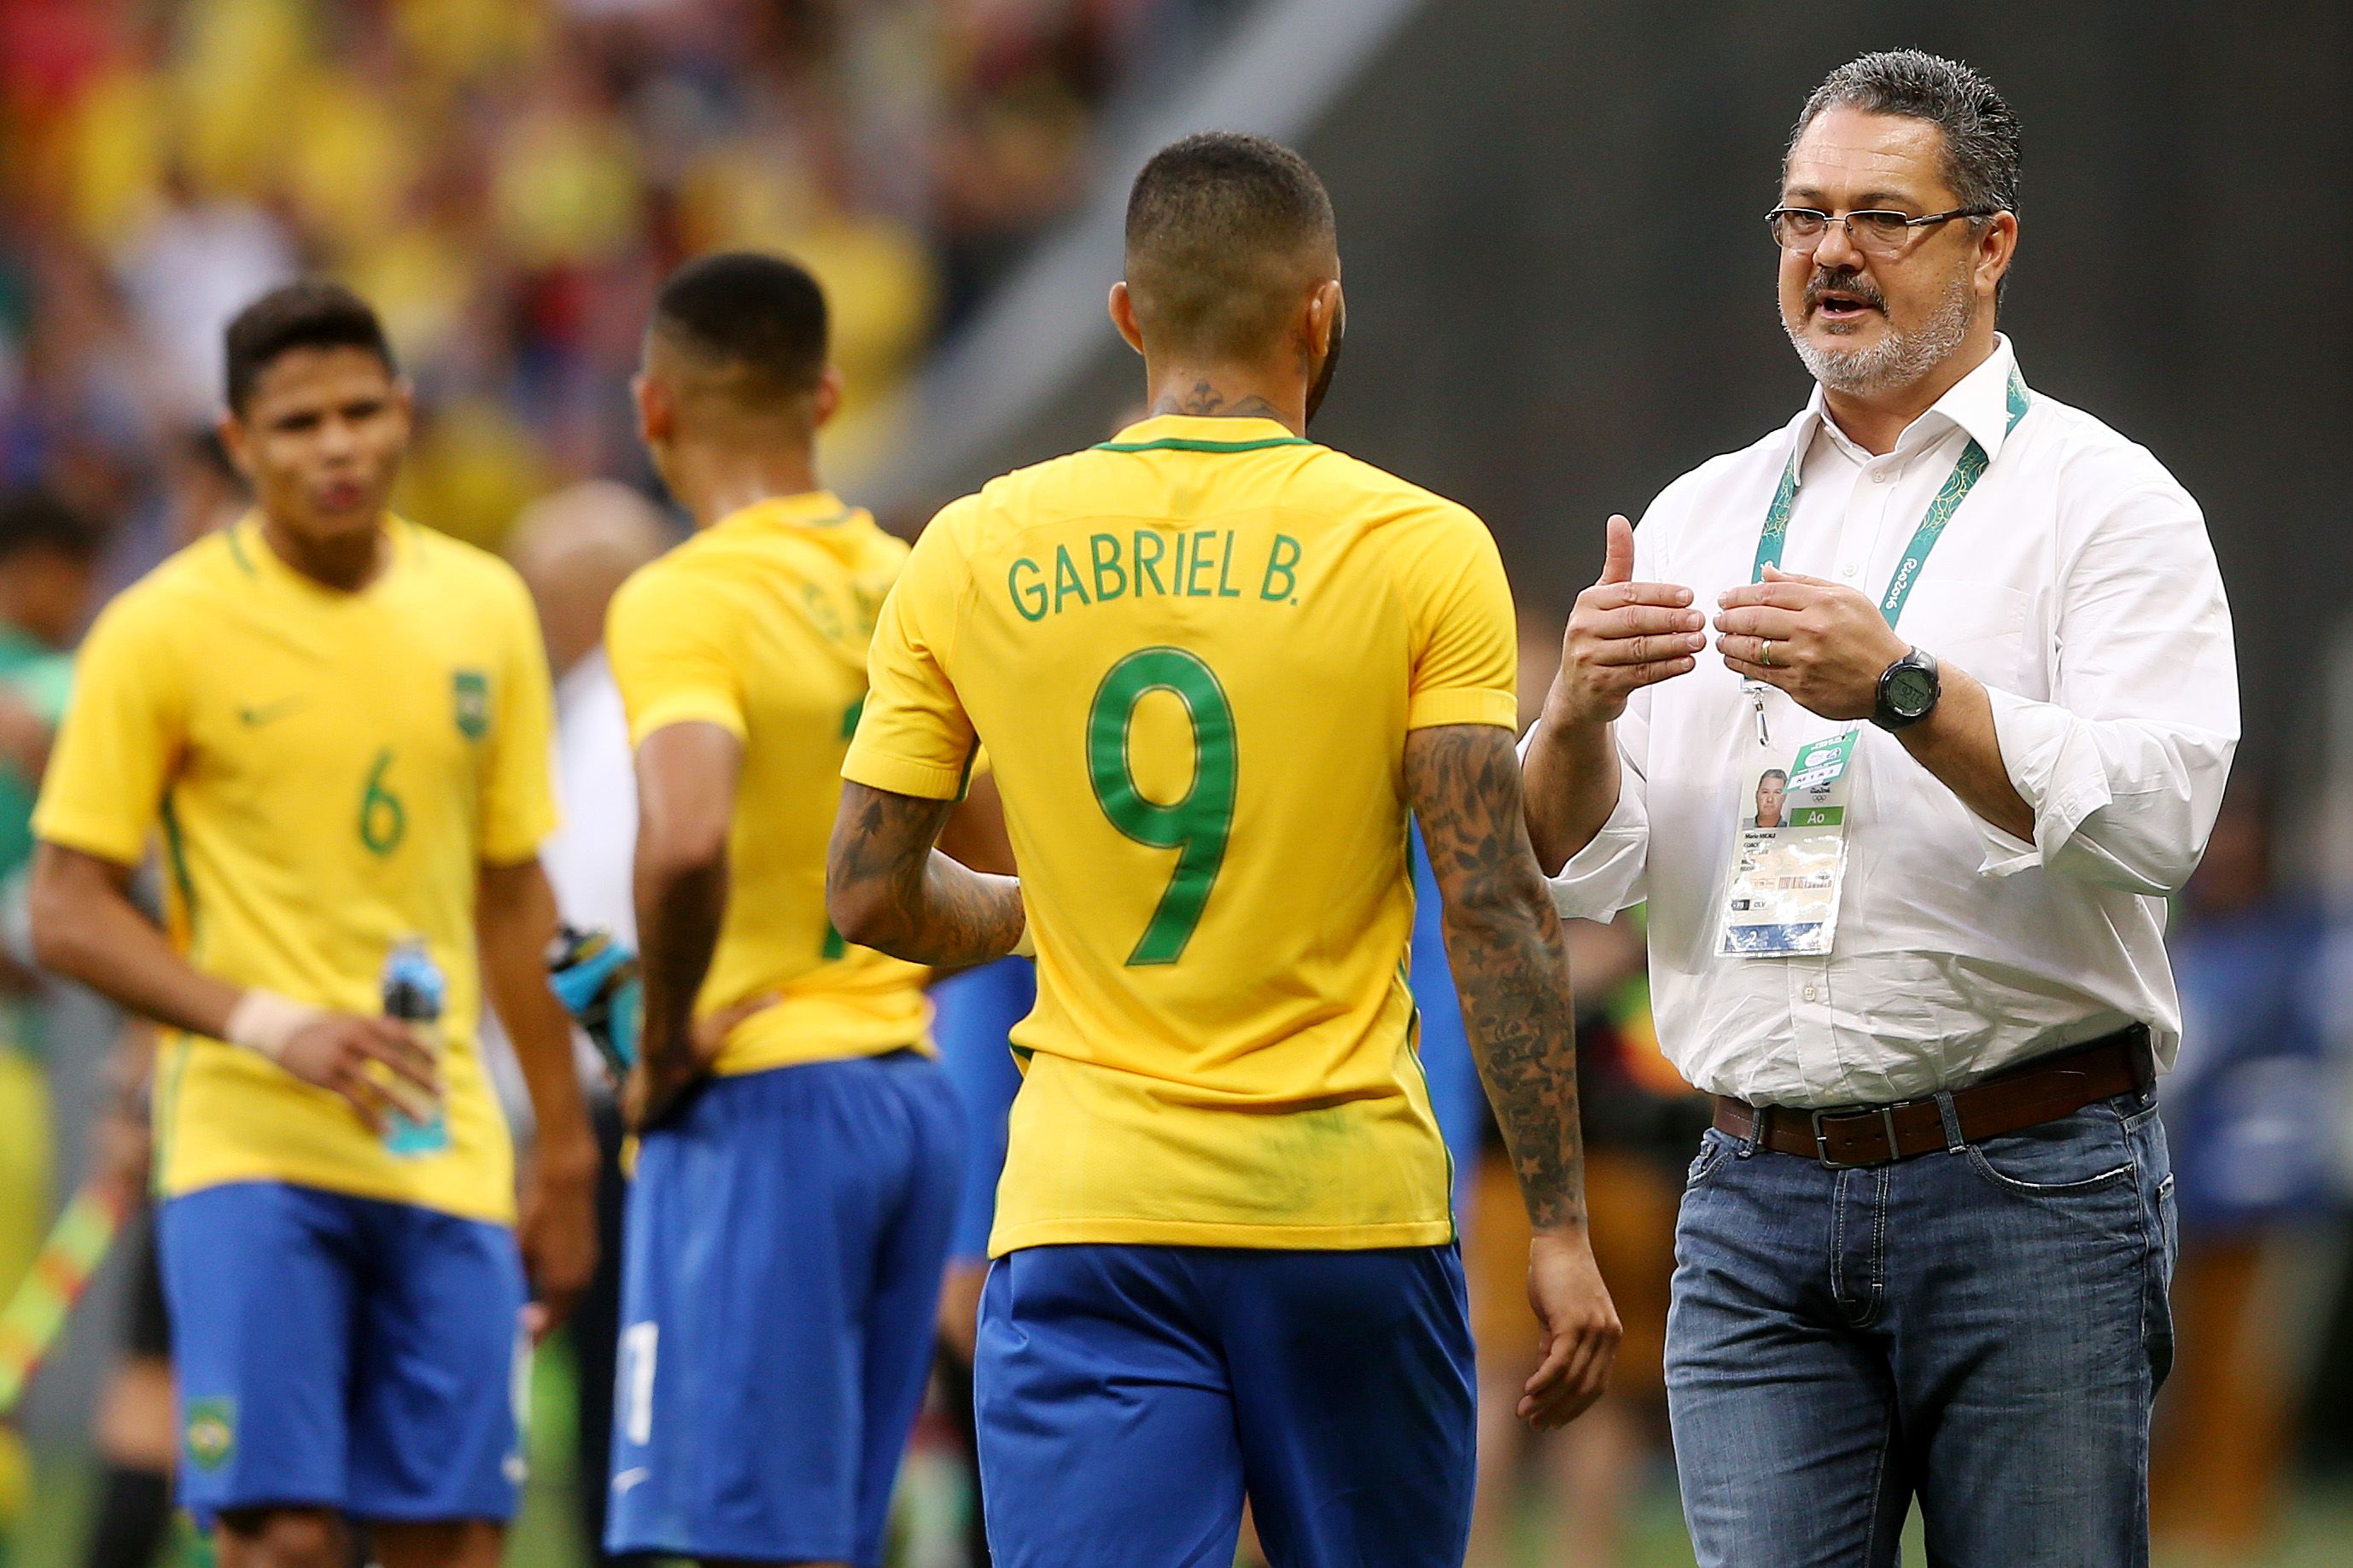 Brazil national soccer team declines in market value of players, is now  world's 4th most expensive soccer team - The Rio Times